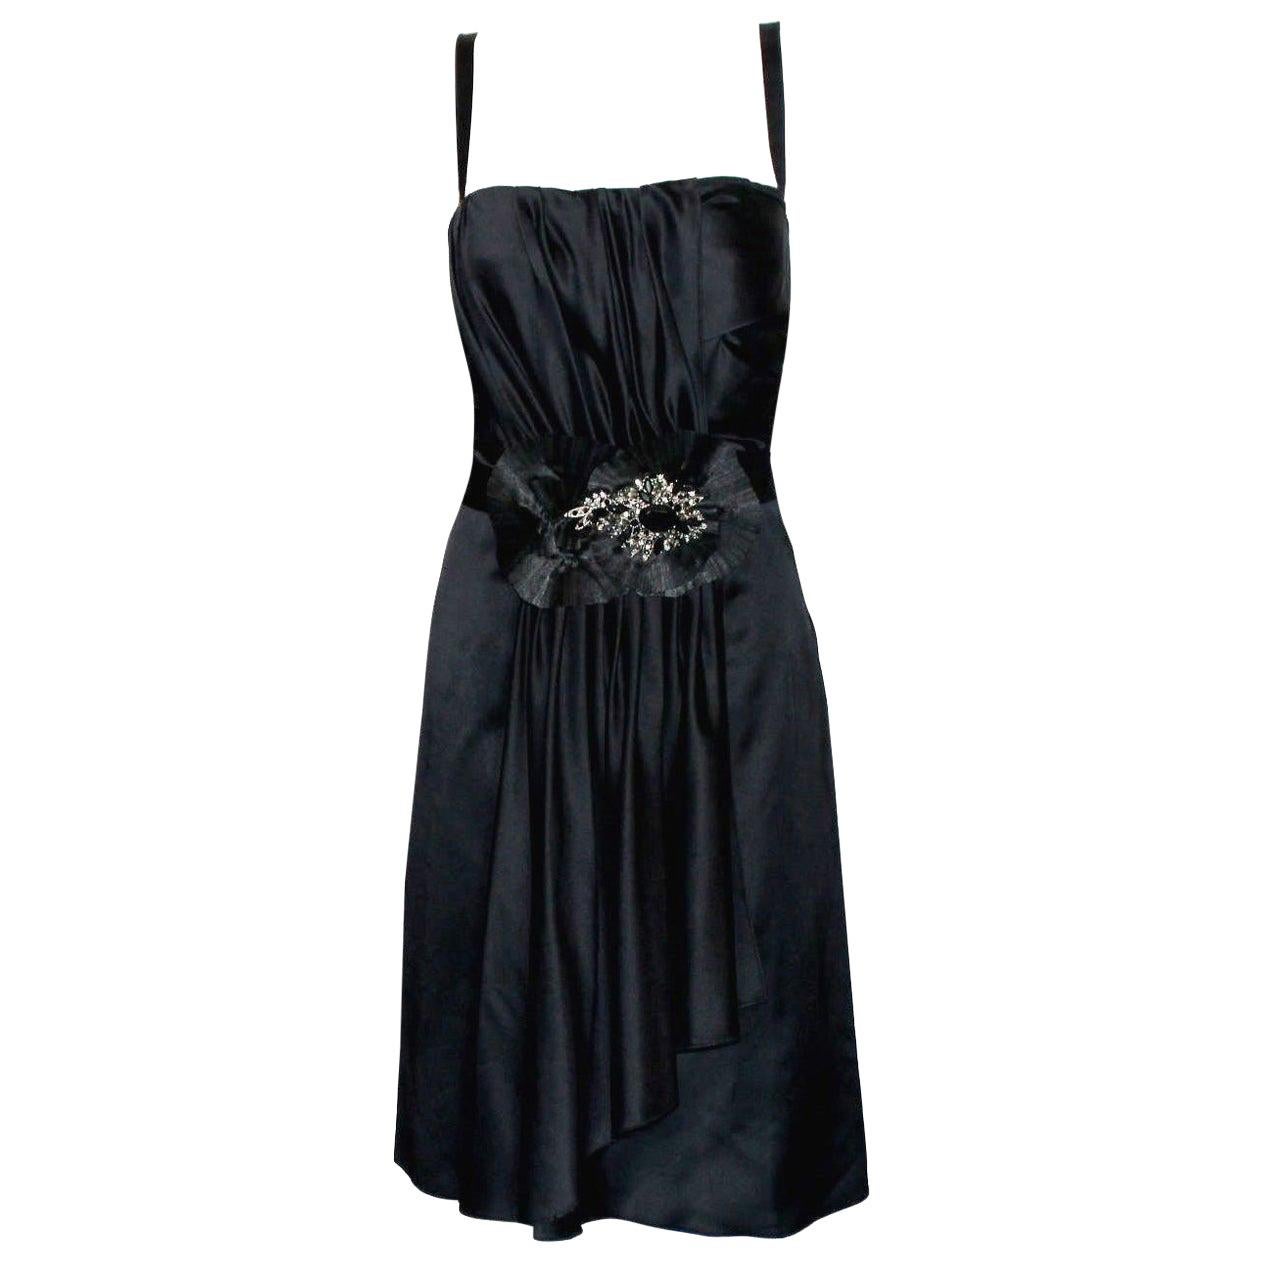 Black Dolce Gabbana Draped Corset Dress with Jeweled Crystals Ornament 40